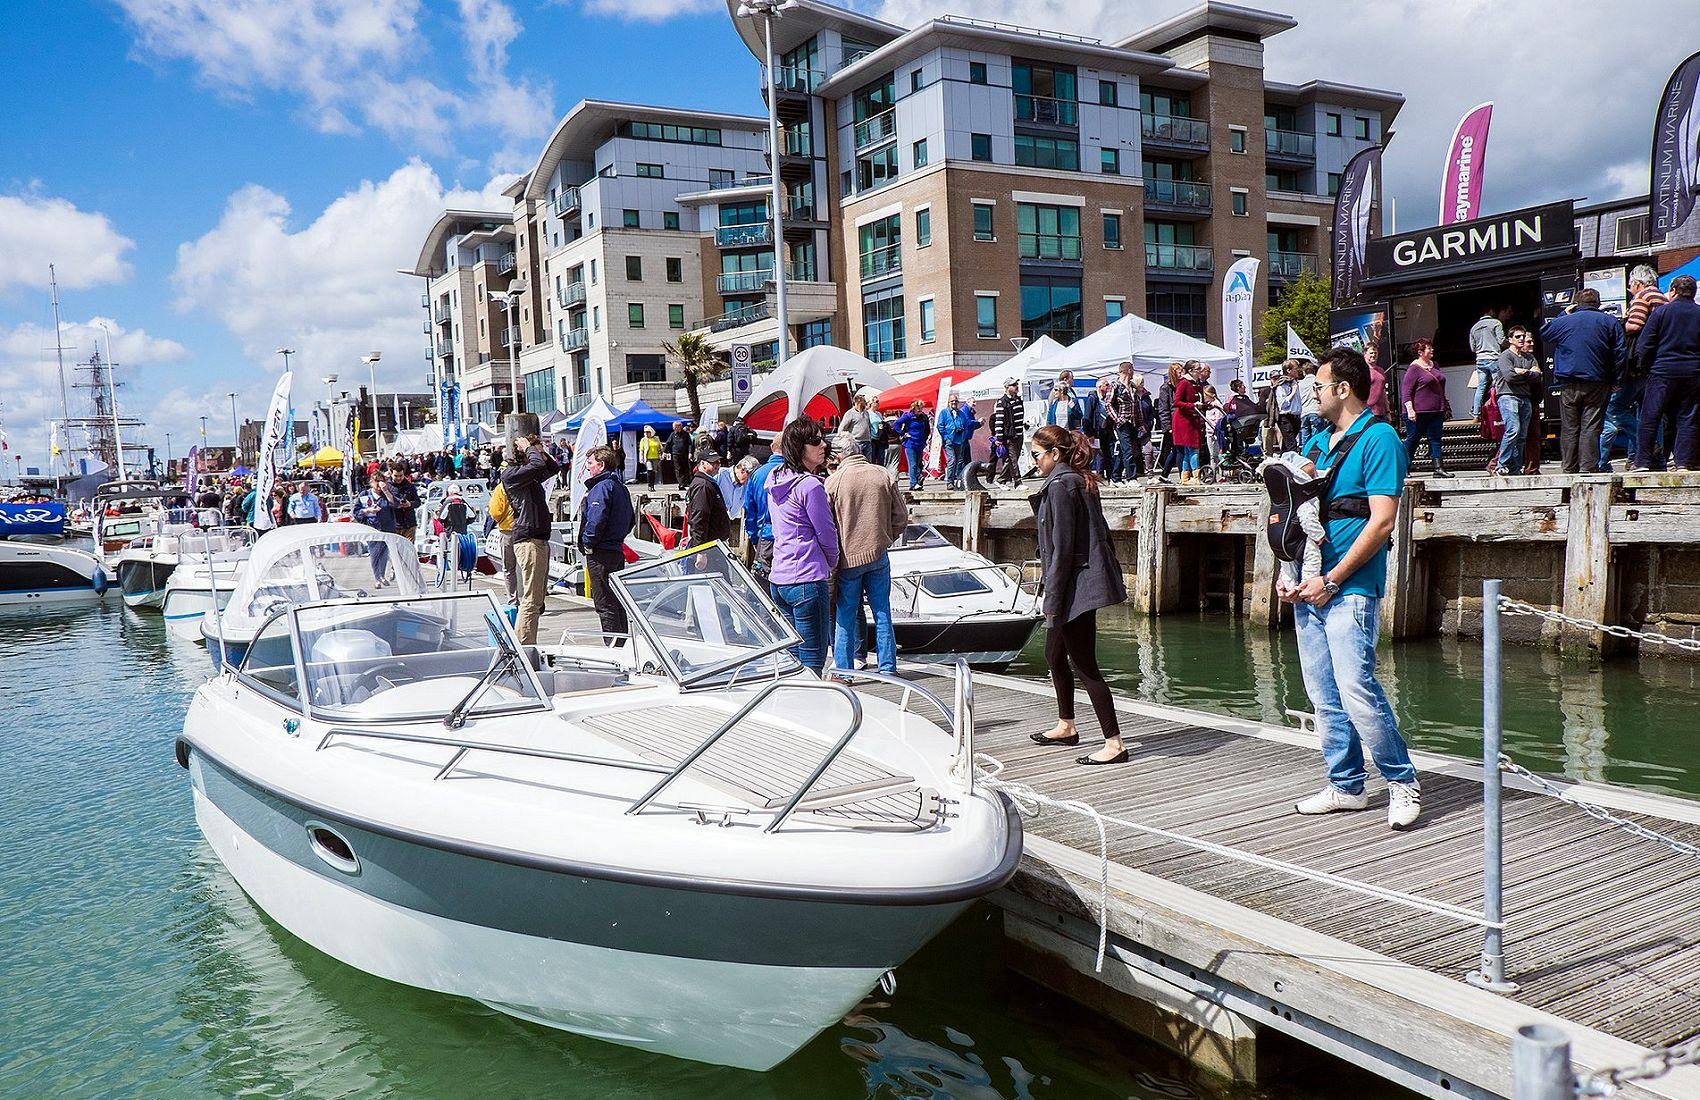 Poole Harbour Boat Show